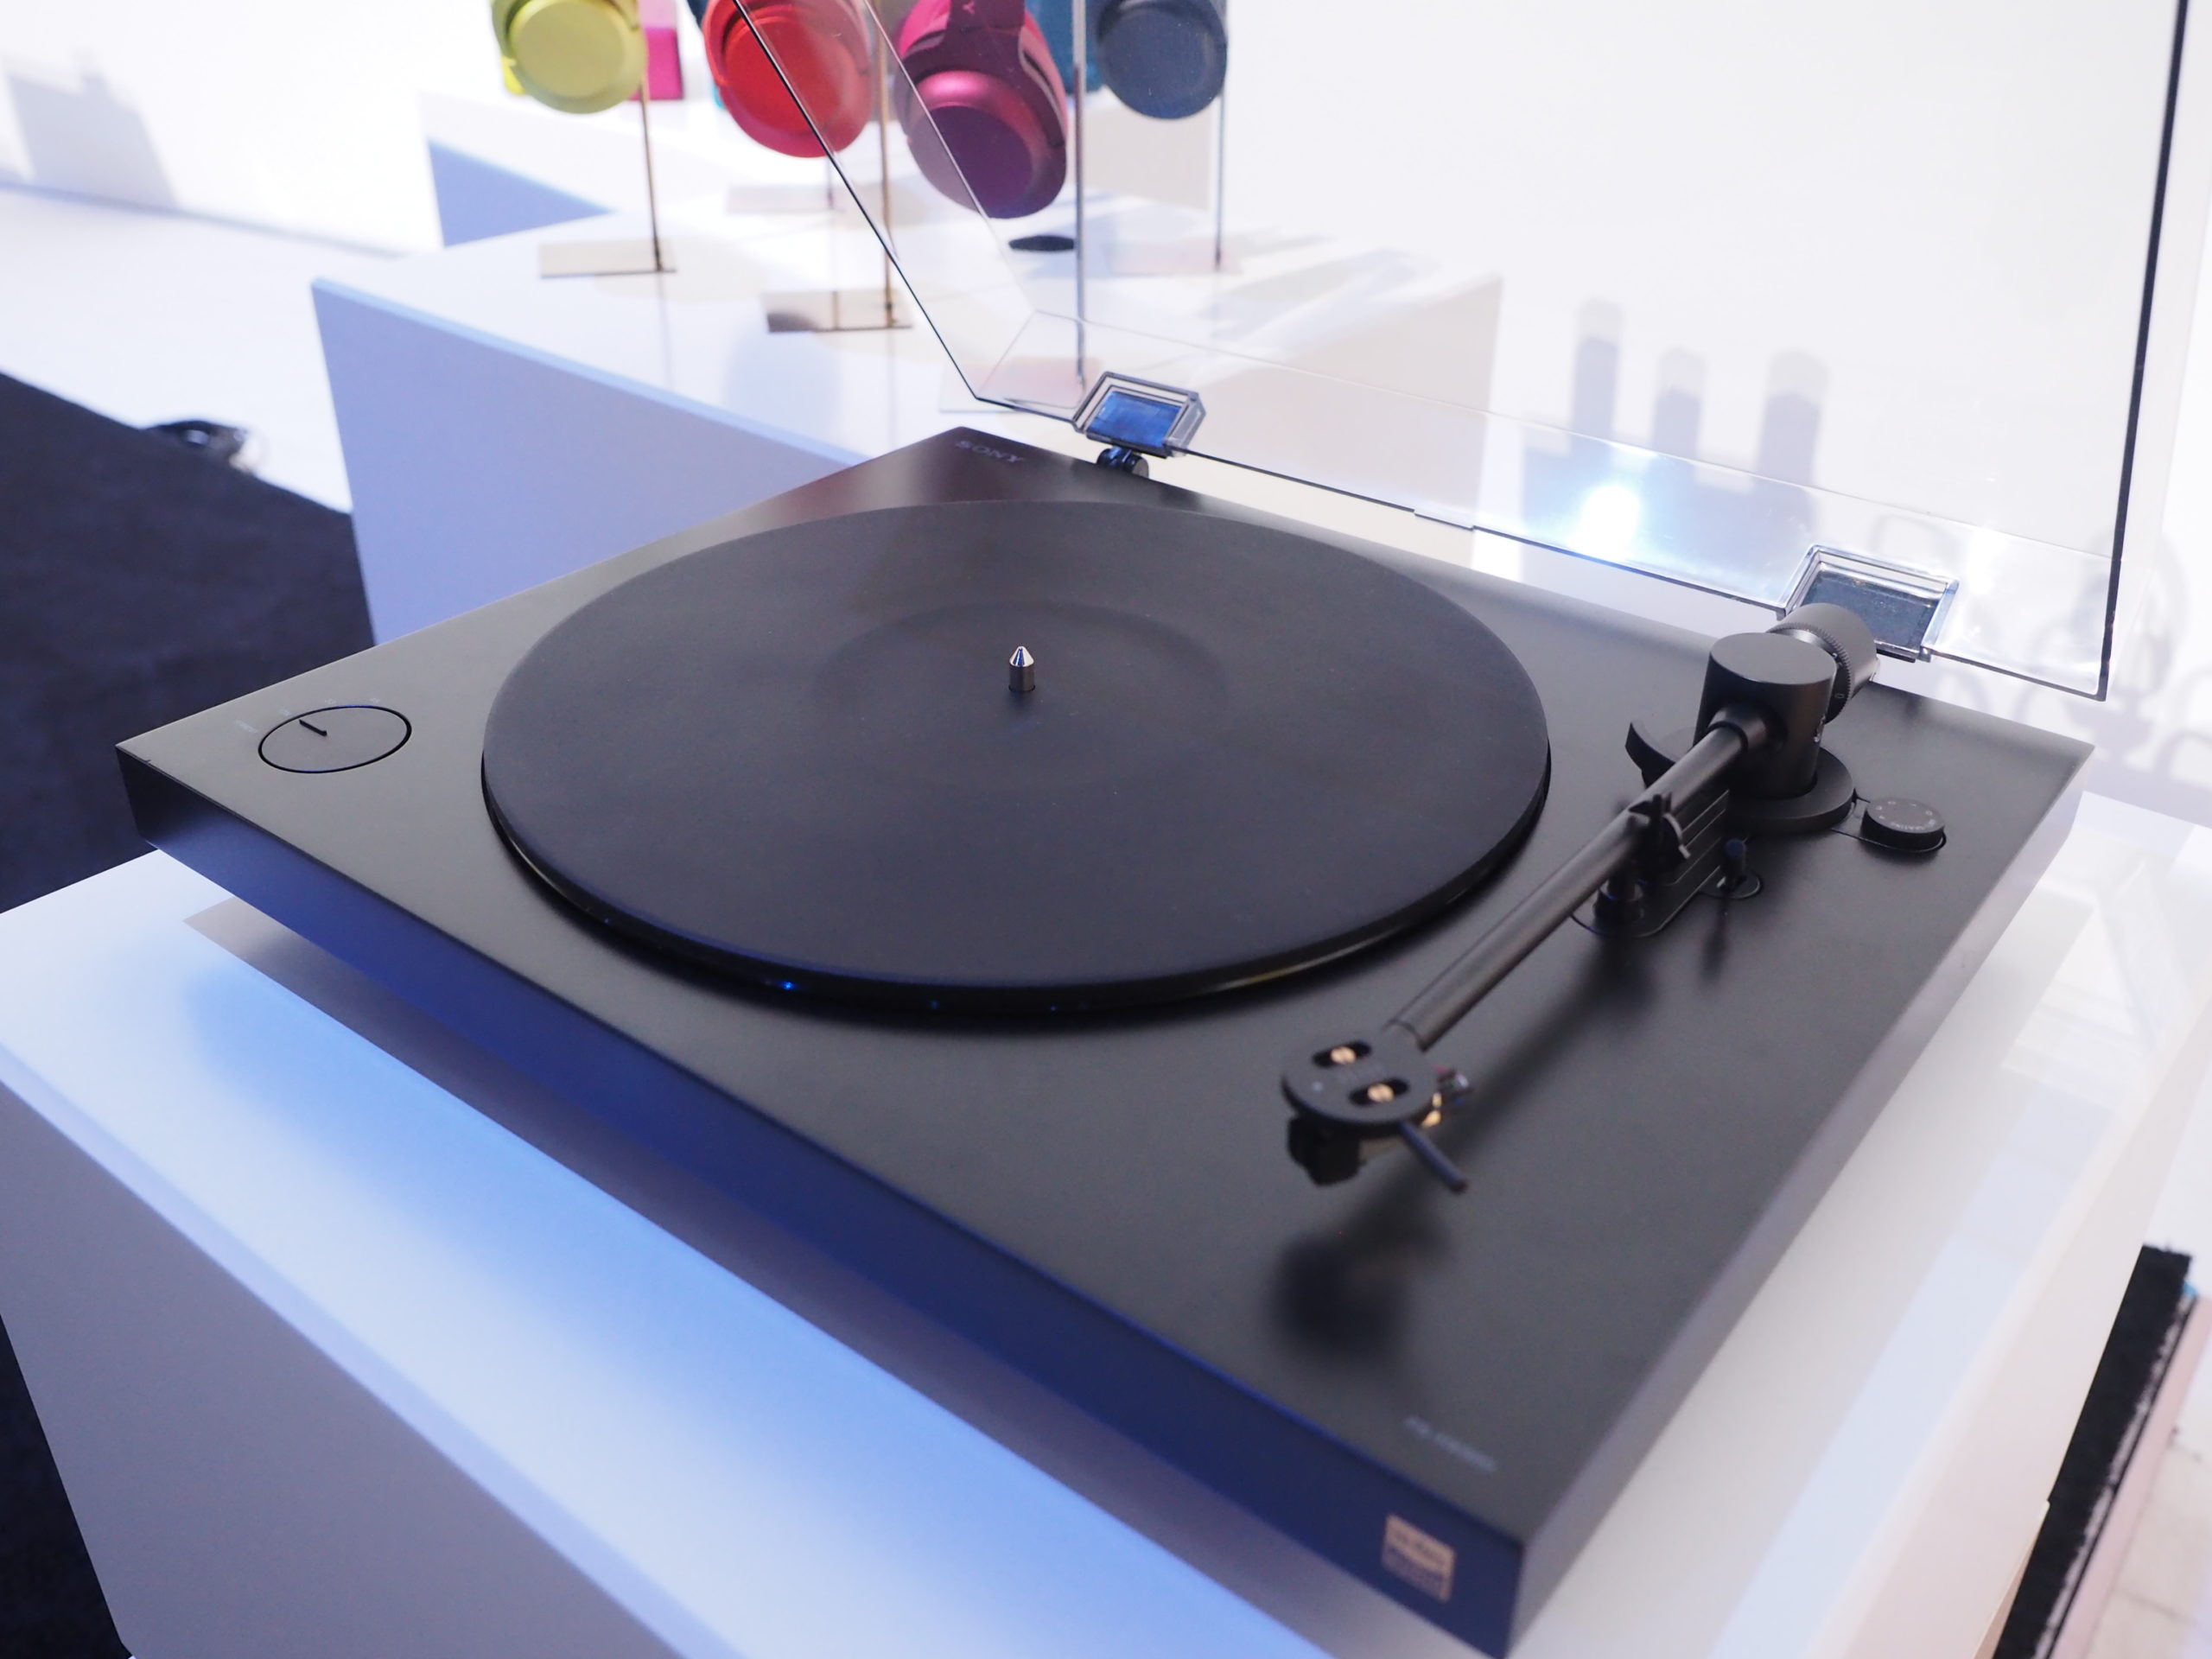 Sony’s Sleek New Turntable Makes Me Want To Rob A Record Store